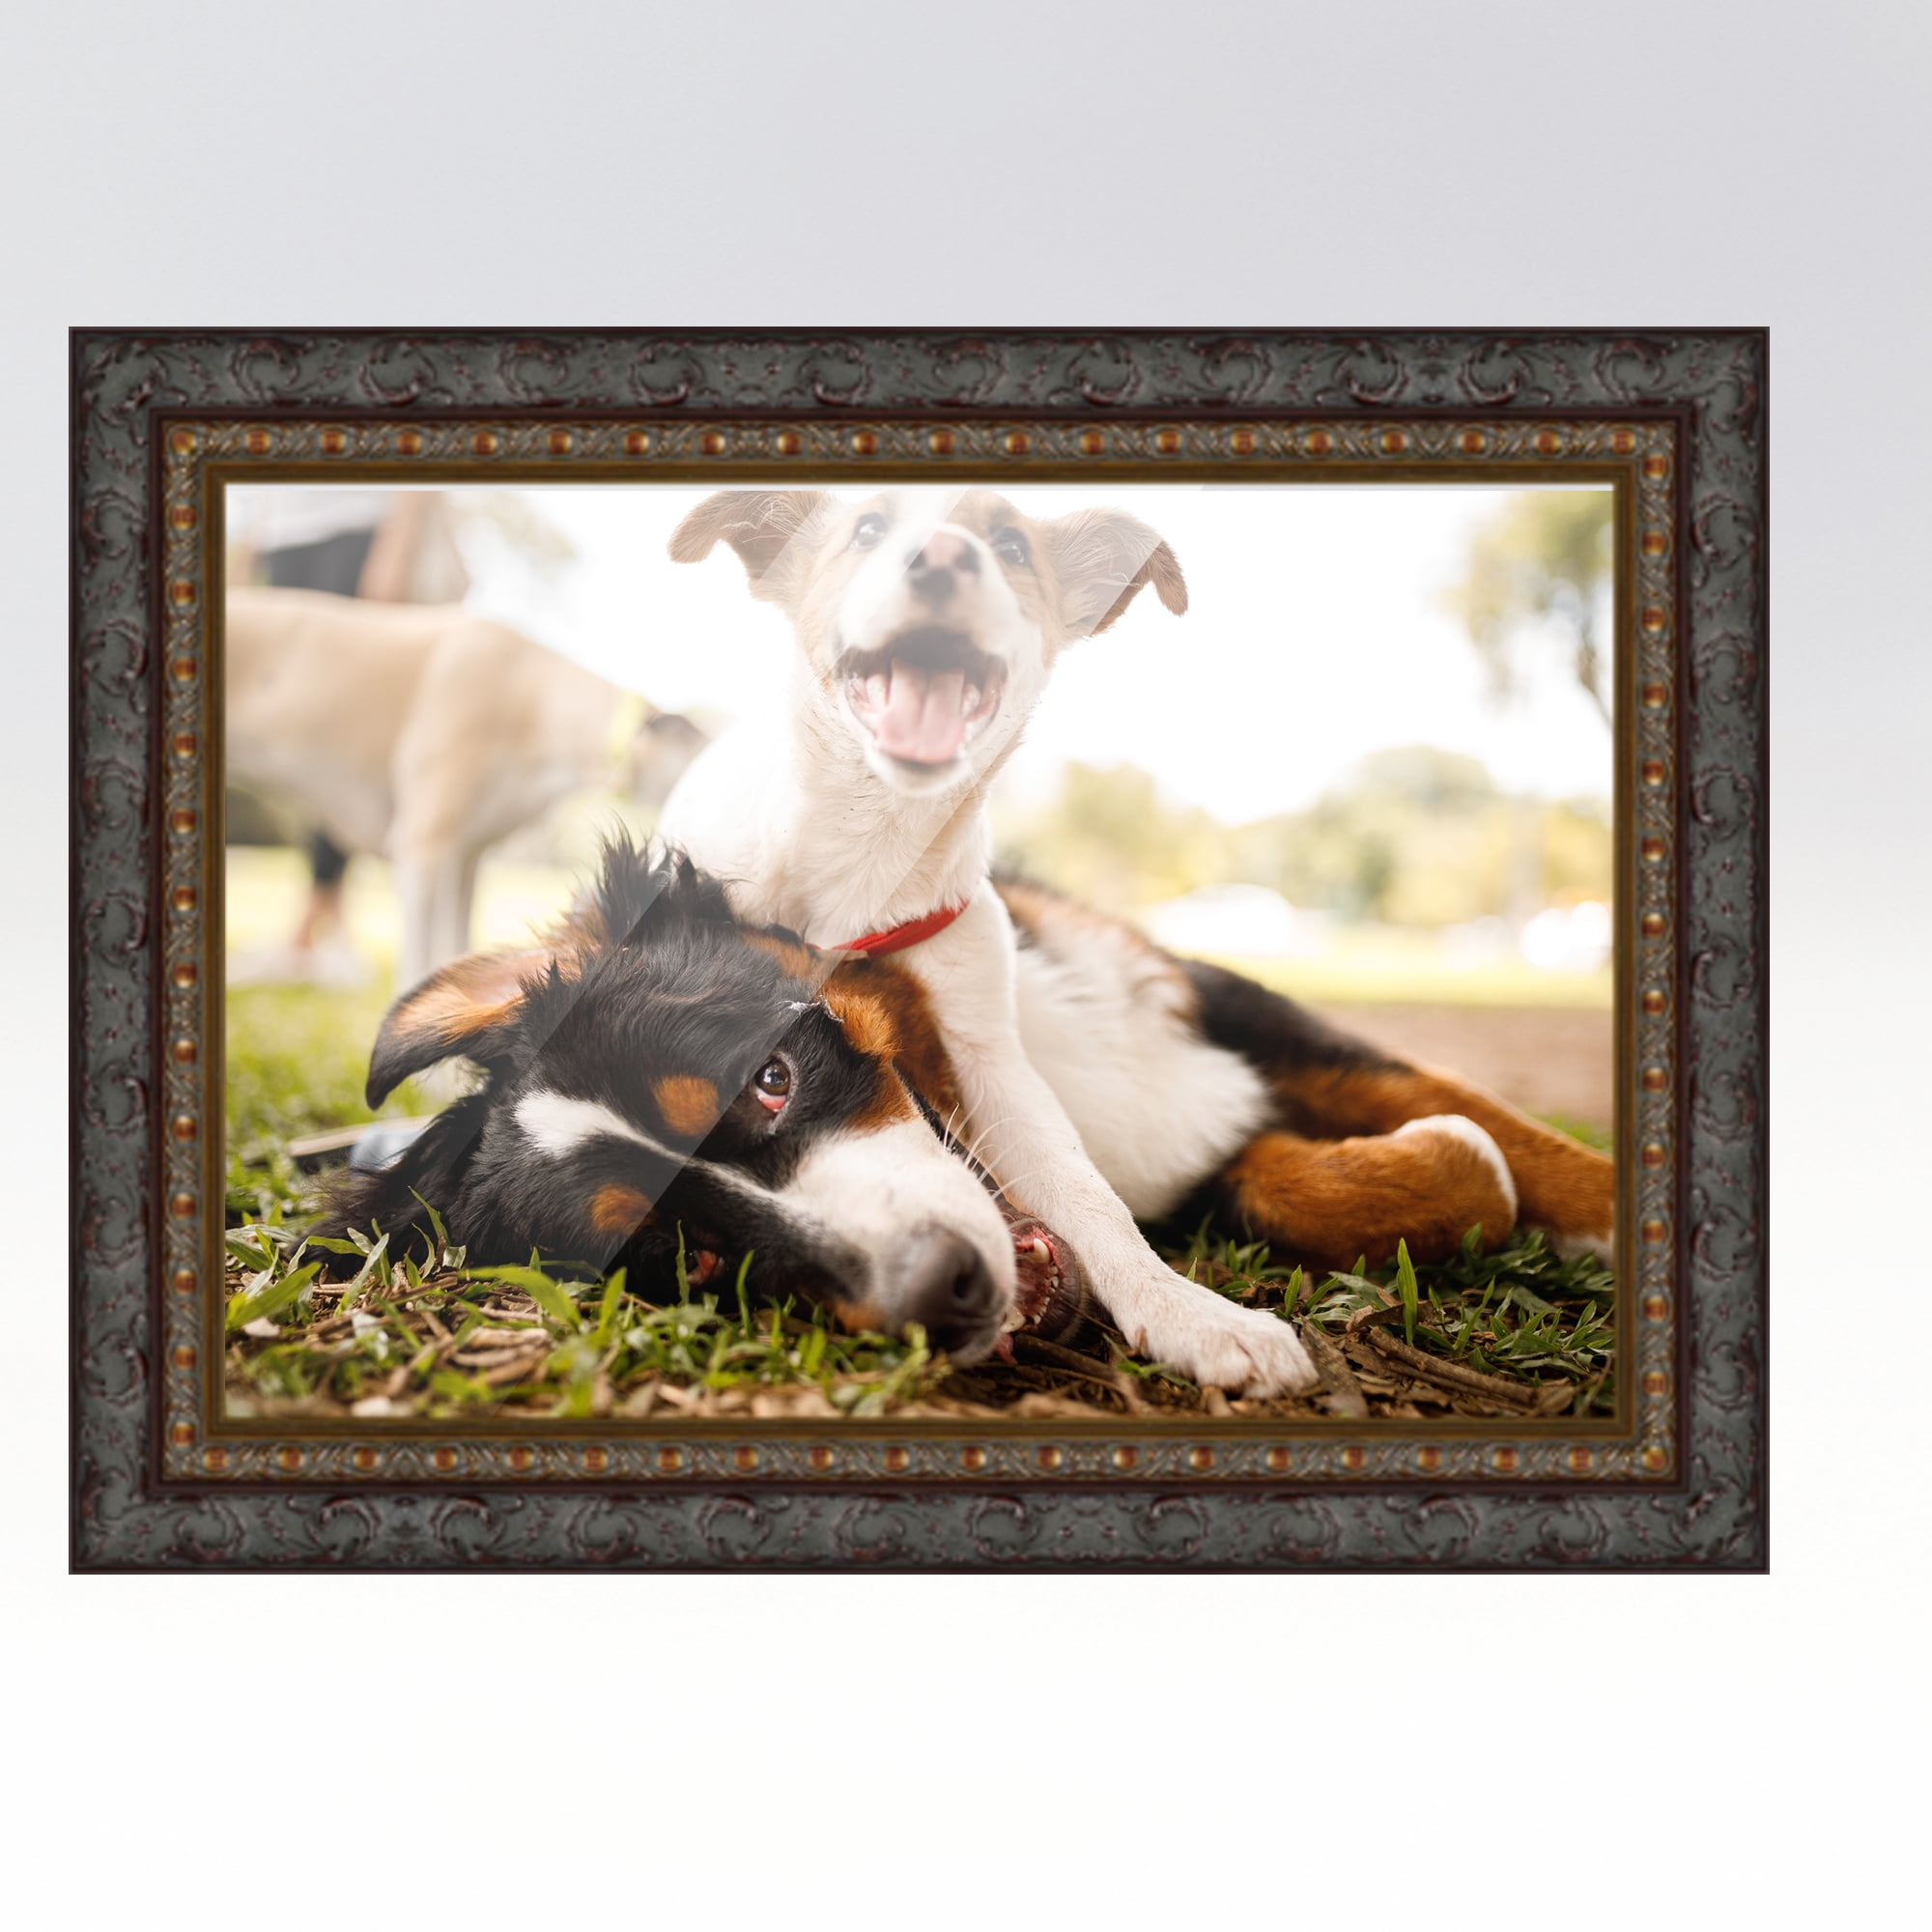 4x7 Frame Black Real Wood Picture Frame Width 1.5 Inches | Interior Frame  Depth 0.5 Inches | Barn Black Distressed Photo Frame Complete with UV